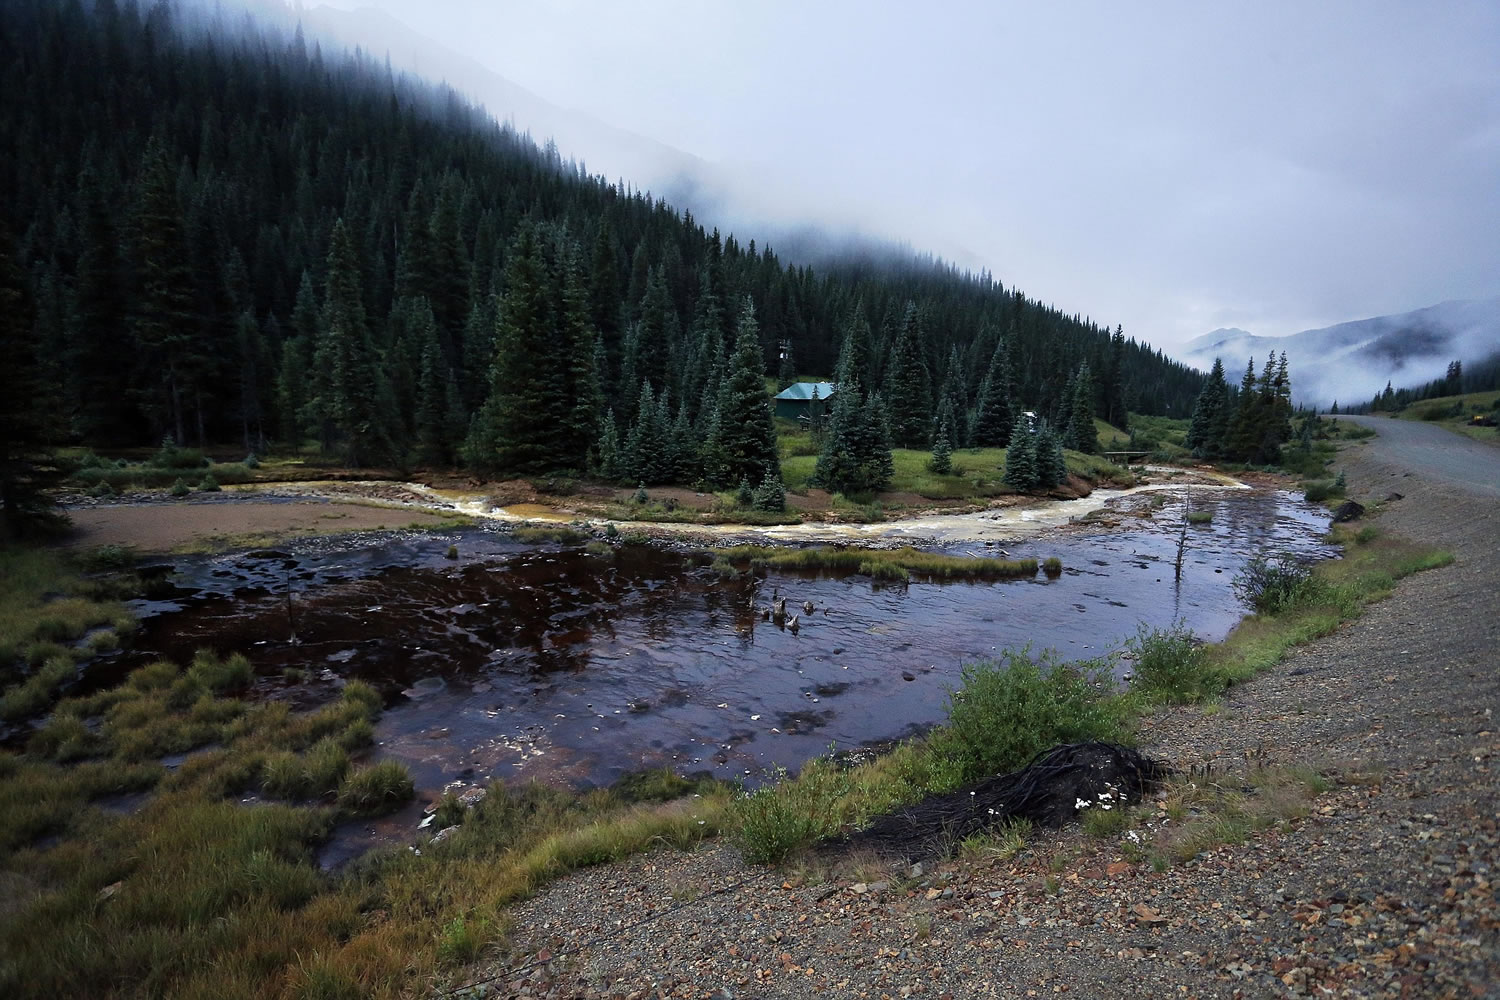 The Cement Creek flows down a valley a few miles downstream from the Gold King mine, where a wastewater accident several days earlier has raised alarm, outside Silverton, Colo., on Wednesday.